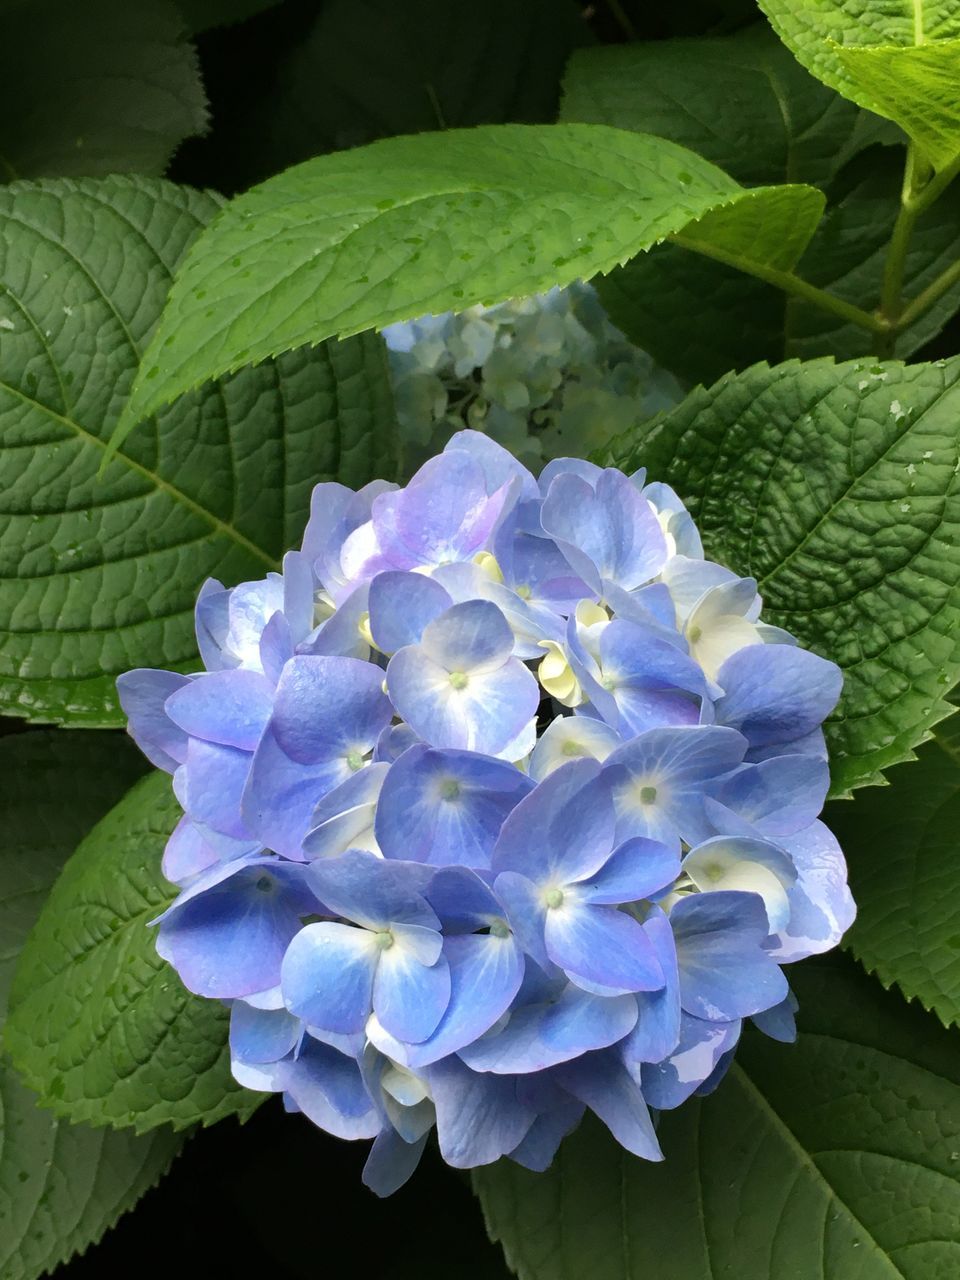 plant, flower, flowering plant, beauty in nature, leaf, plant part, freshness, growth, petal, nature, close-up, inflorescence, purple, fragility, flower head, hydrangea, blue, no people, springtime, green, outdoors, botany, hydrangea serrata, day